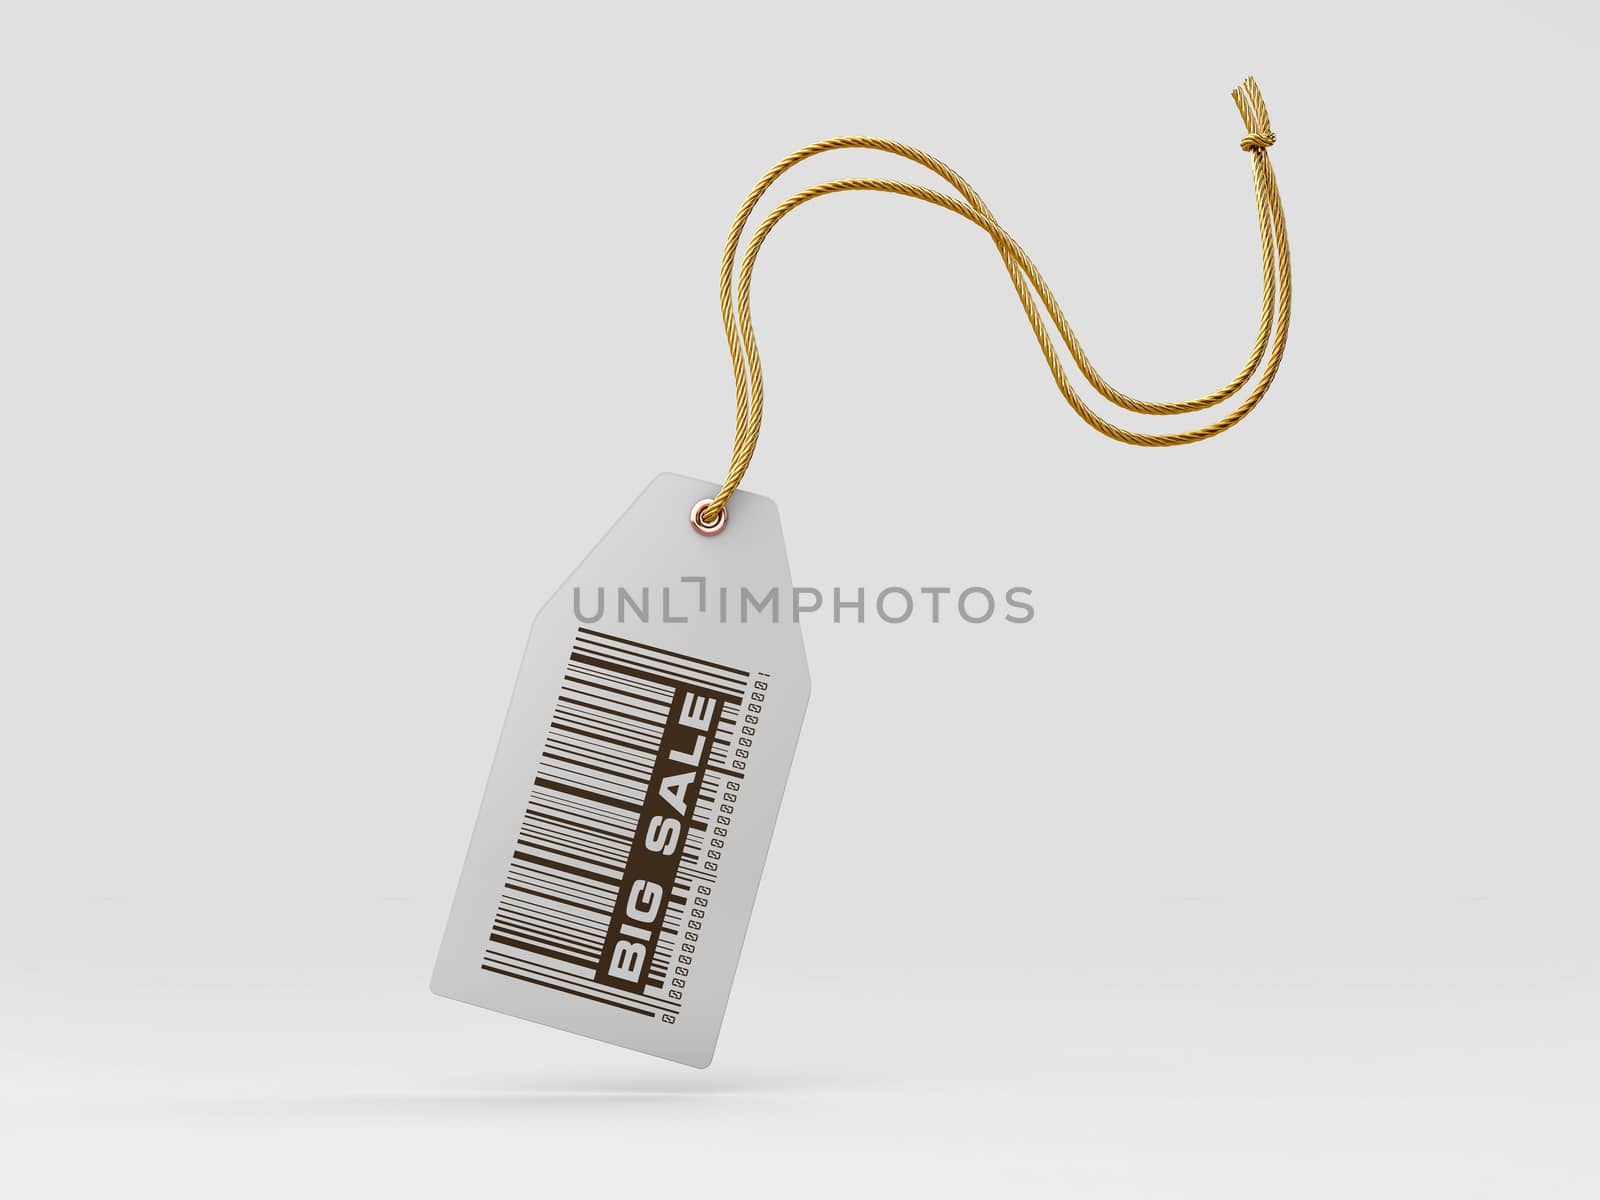 3drendering of tag tied with big sale title. Price tag, gift tag, clipping path included.